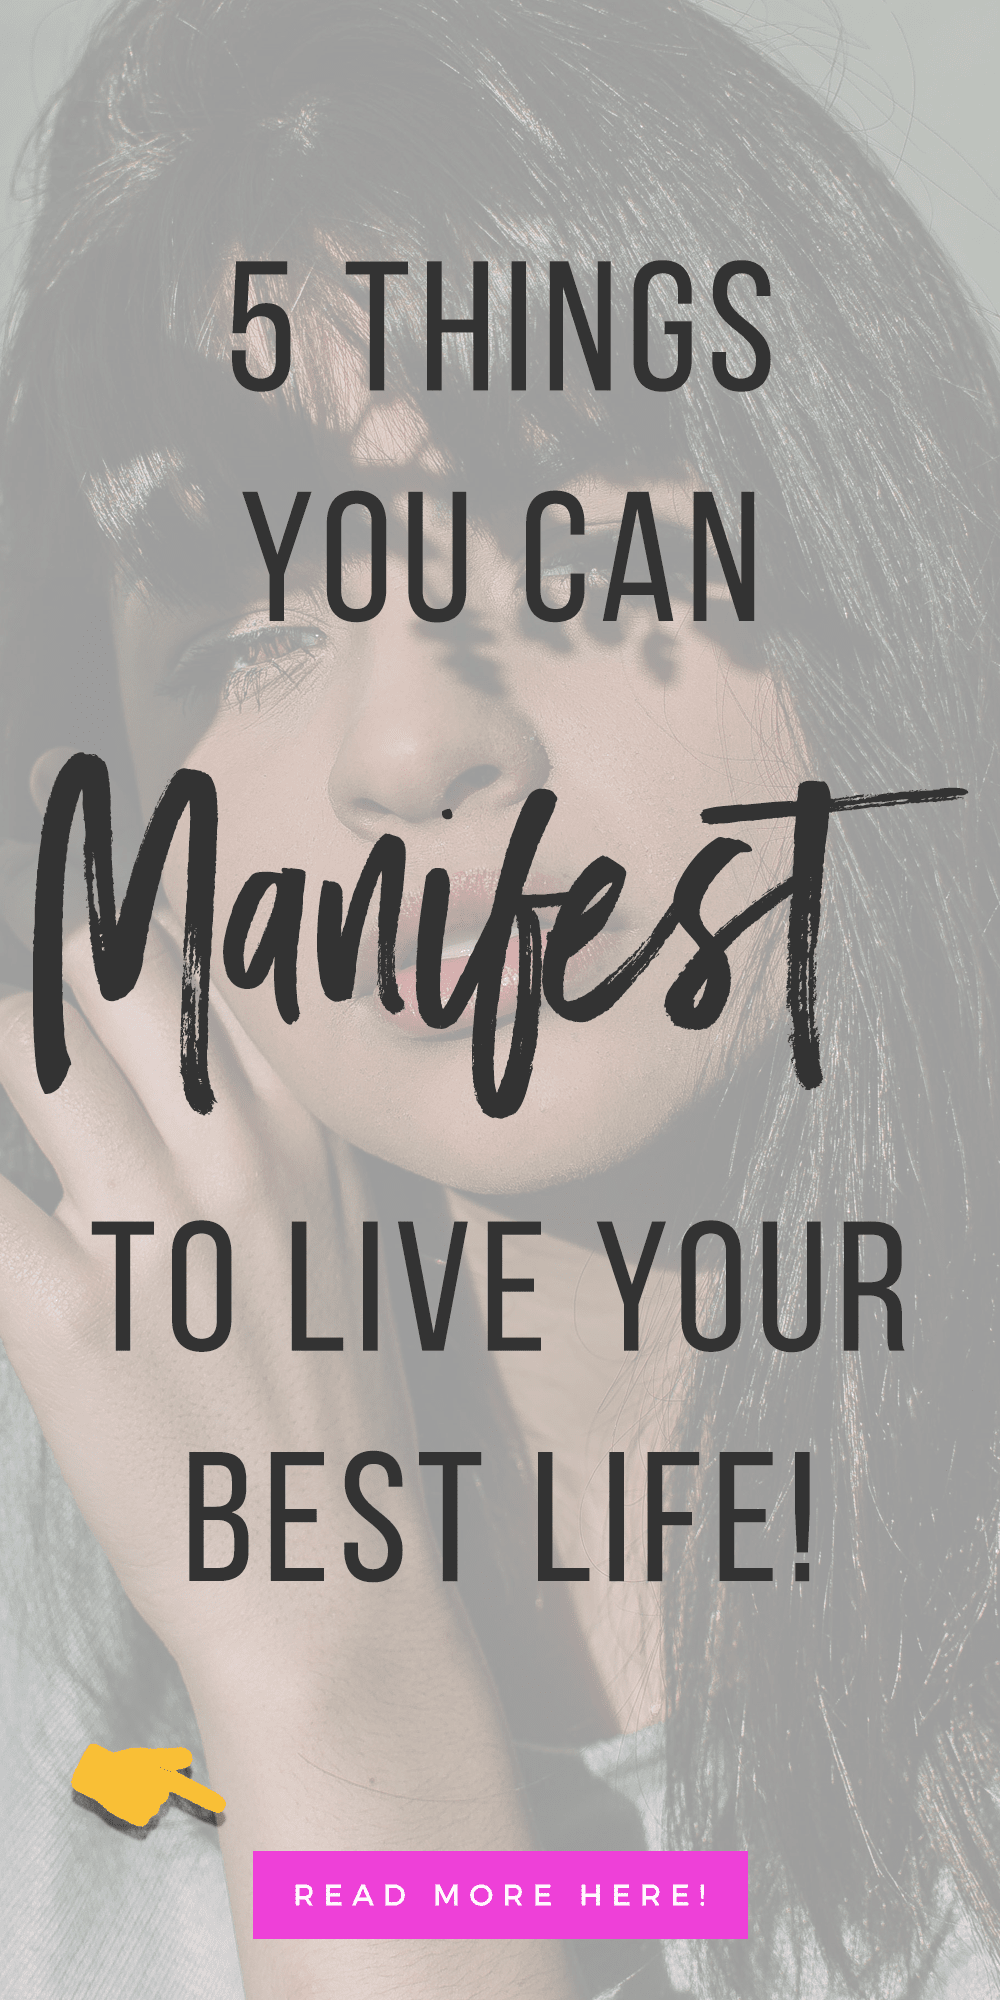 5 Things You Can Manifest To Live Your Best Life